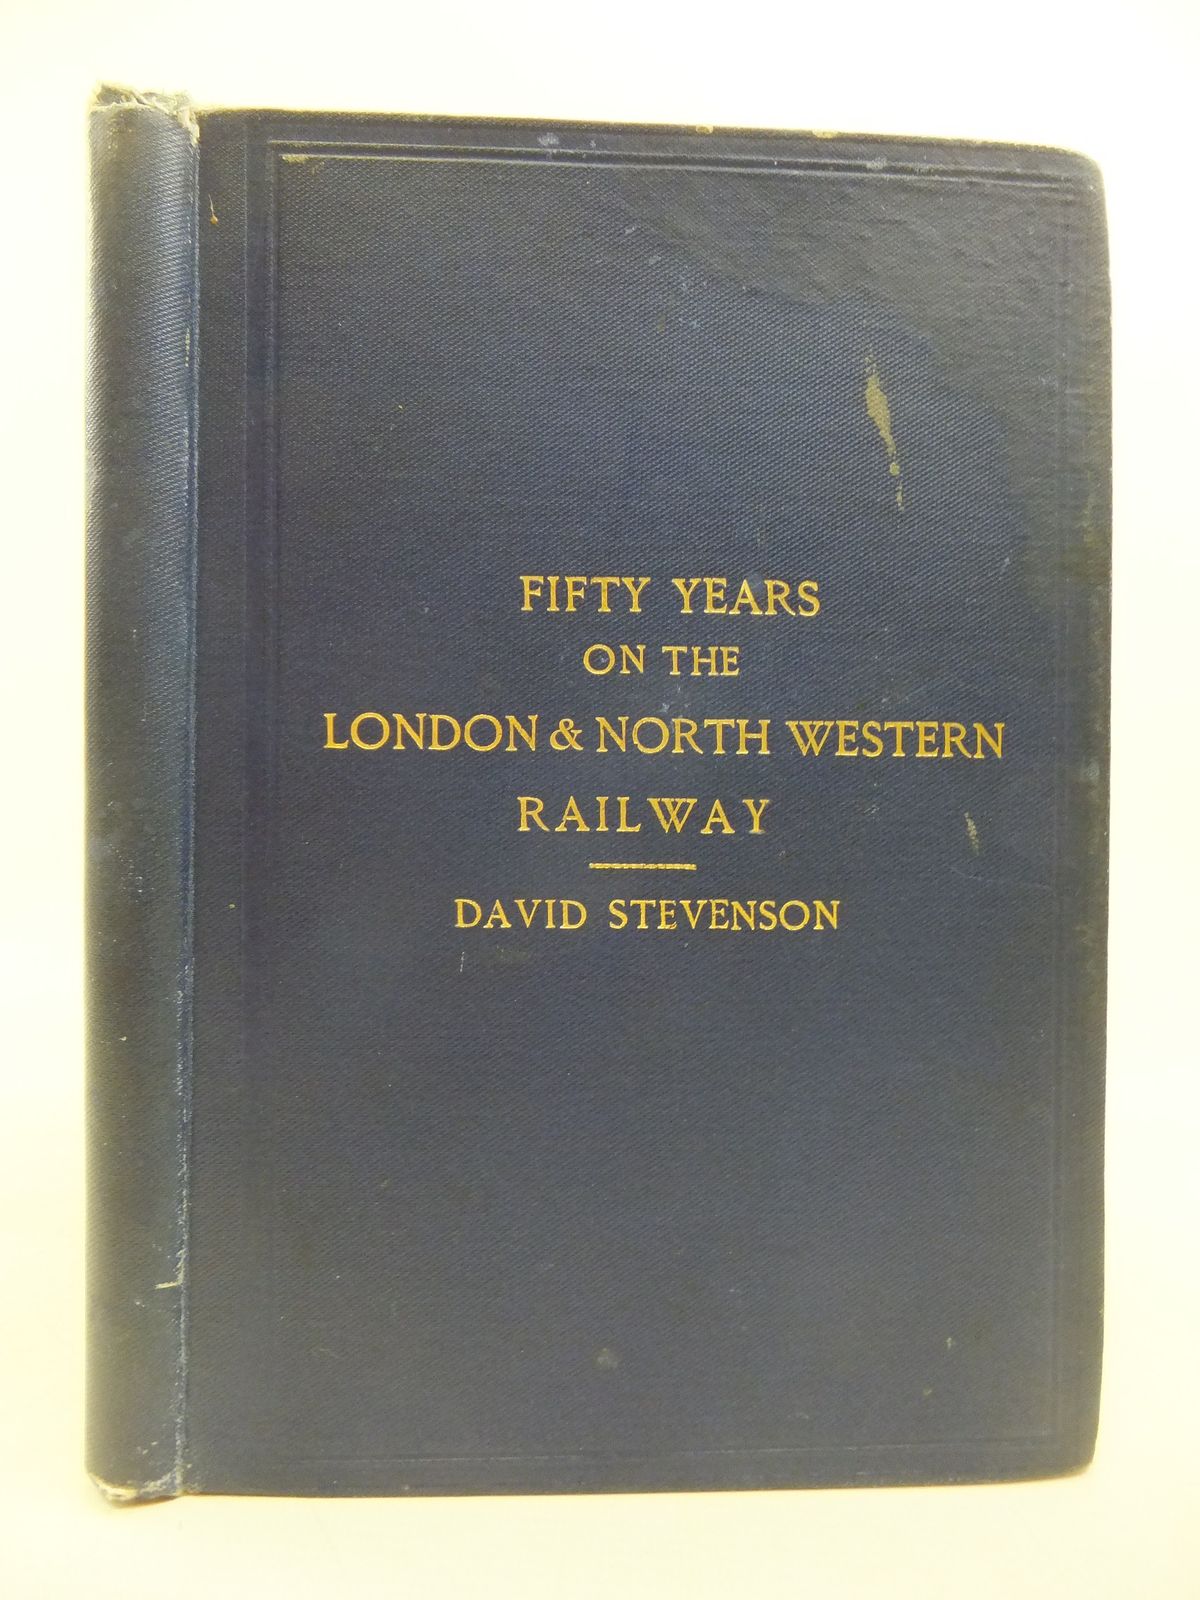 Photo of FIFTY YEARS ON THE LONDON &amp; NORTH WESTERN RAILWAY written by Turner, Leopold Stevenson, David published by McCorquodale &amp; Co. Ltd. (STOCK CODE: 1208103)  for sale by Stella & Rose's Books